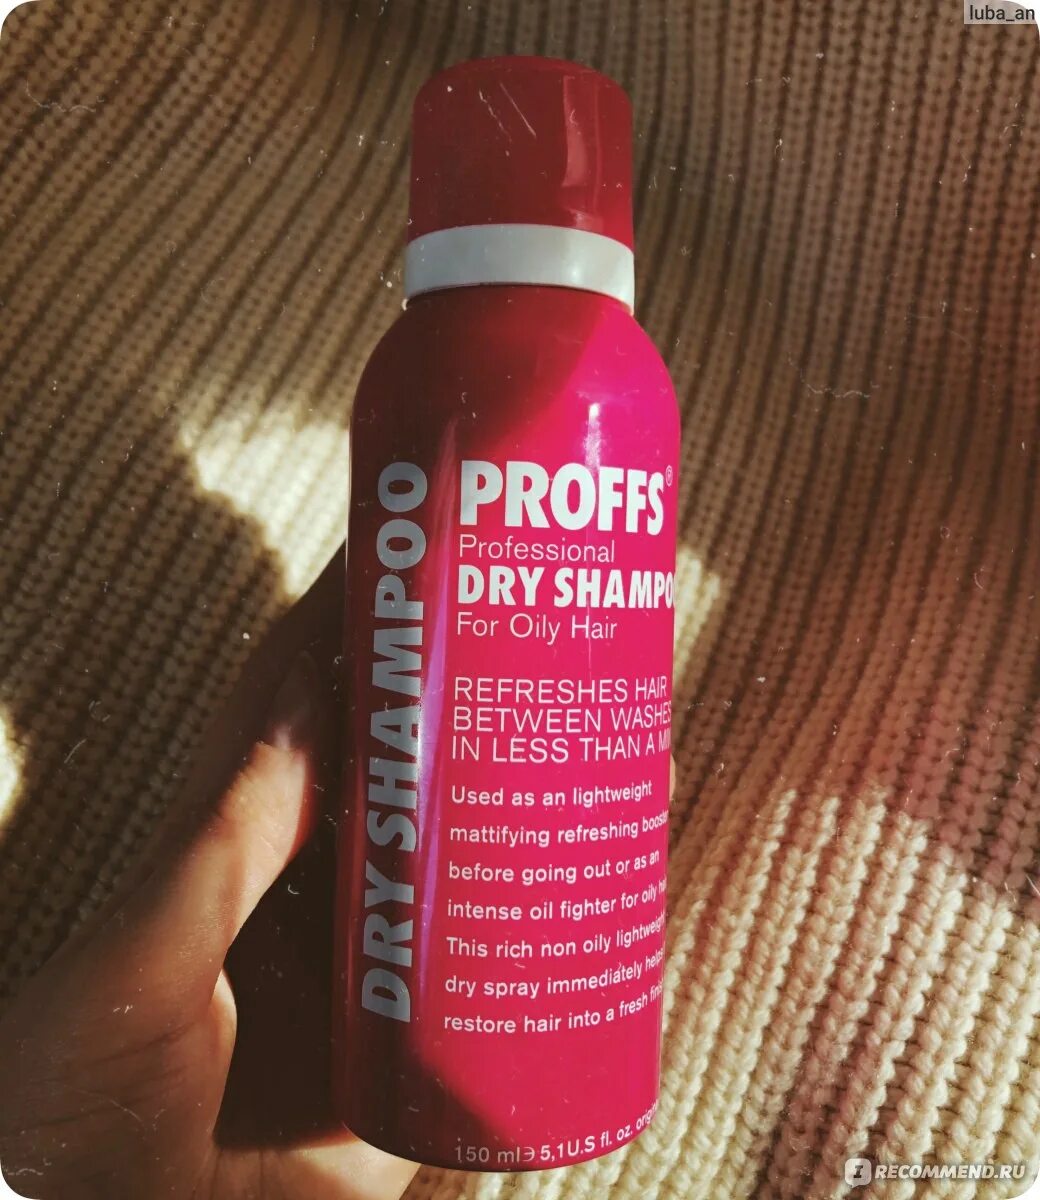 Irecommend волосы. Proffs professional Dry Shampoo for oily hair. Сухой шампунь irecommend. Oriense Proff шампунь. Шампунь покраска волос irecommend.